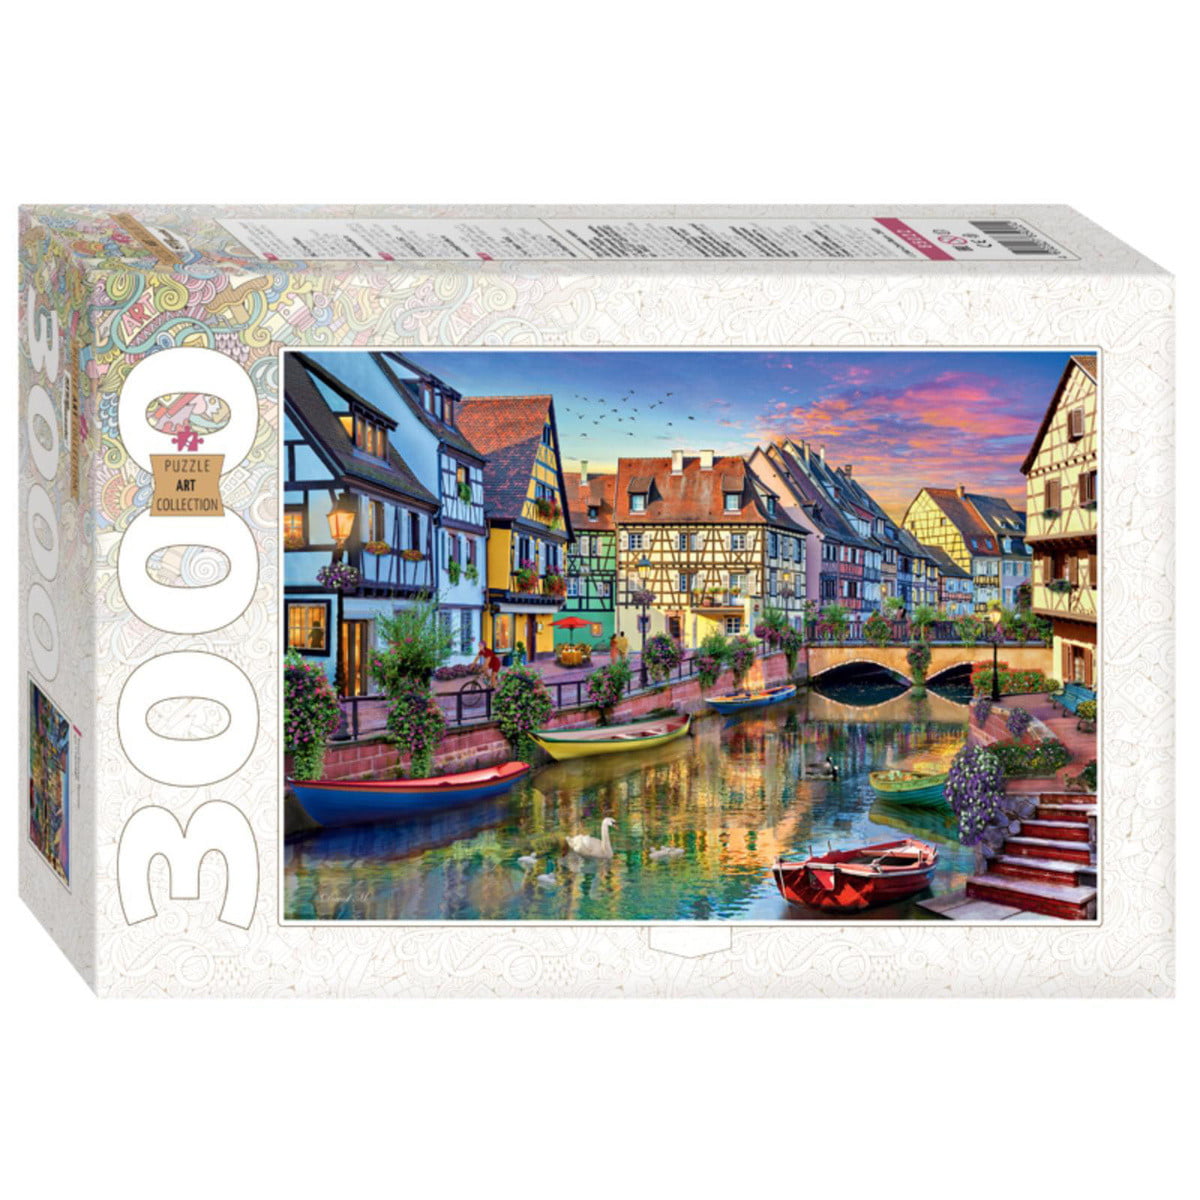 Puzzles for Adults Jigsaw Puzzles 3000 Pieces for Adults Kids Puzzles 3000 Pieces Landscape Unique Birthday Present Suitable for Teenagers and Adults